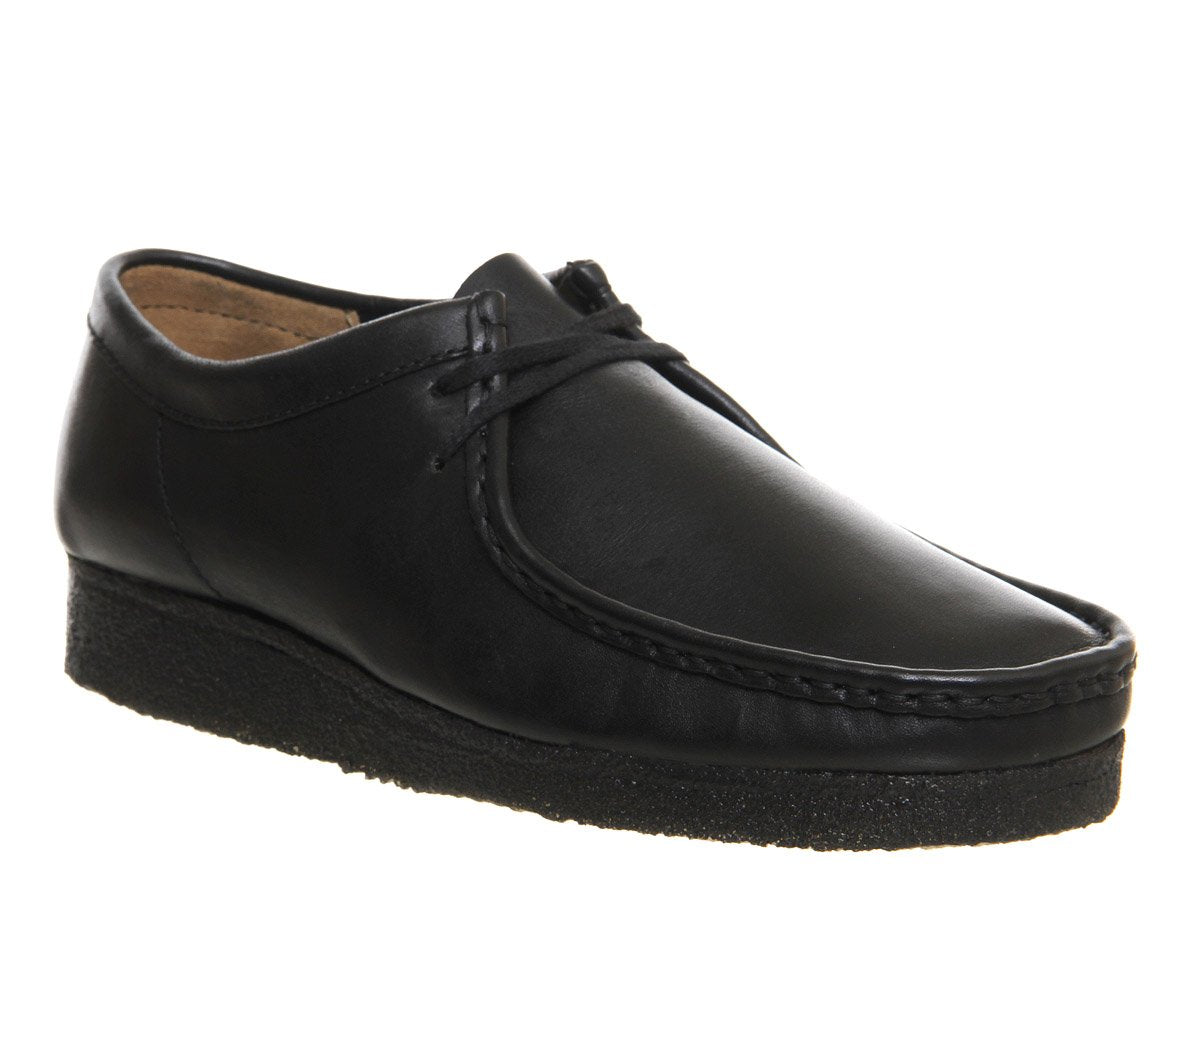 wallabee style shoes